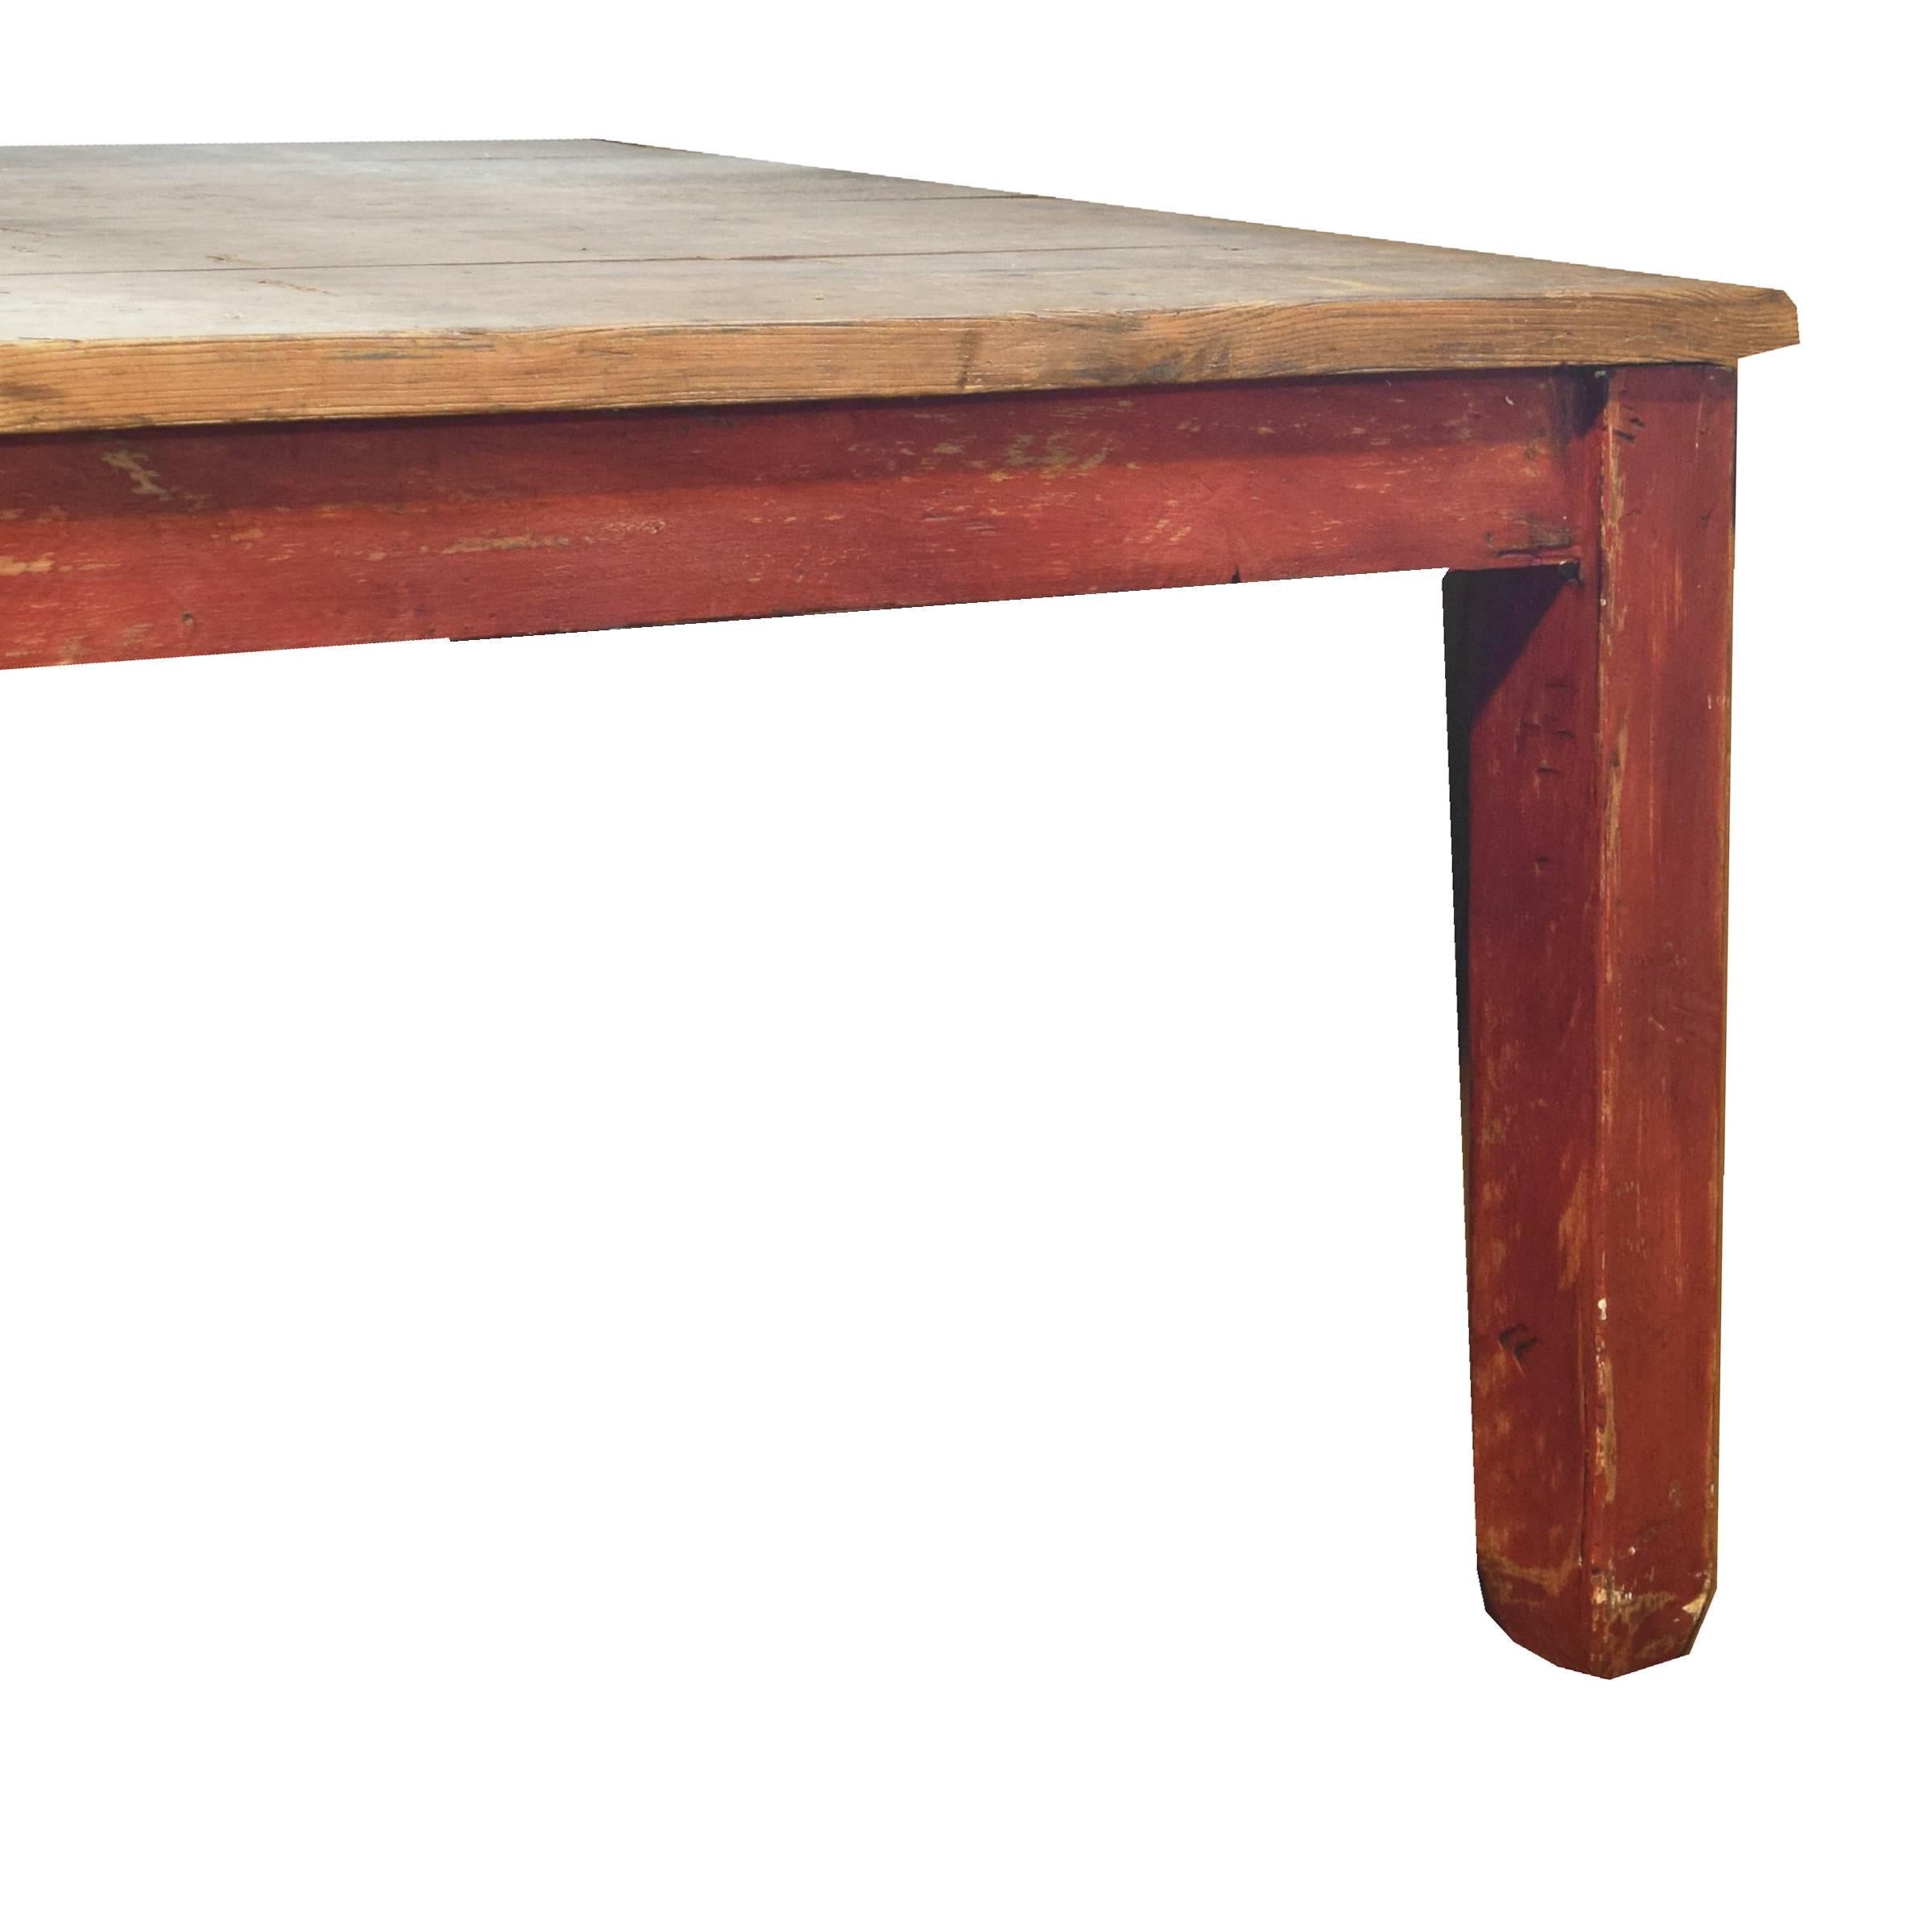 A monumental Italian work table with an incredible unfinished wide plank pine top and red painted square legs with tapered feet, circa 1900.